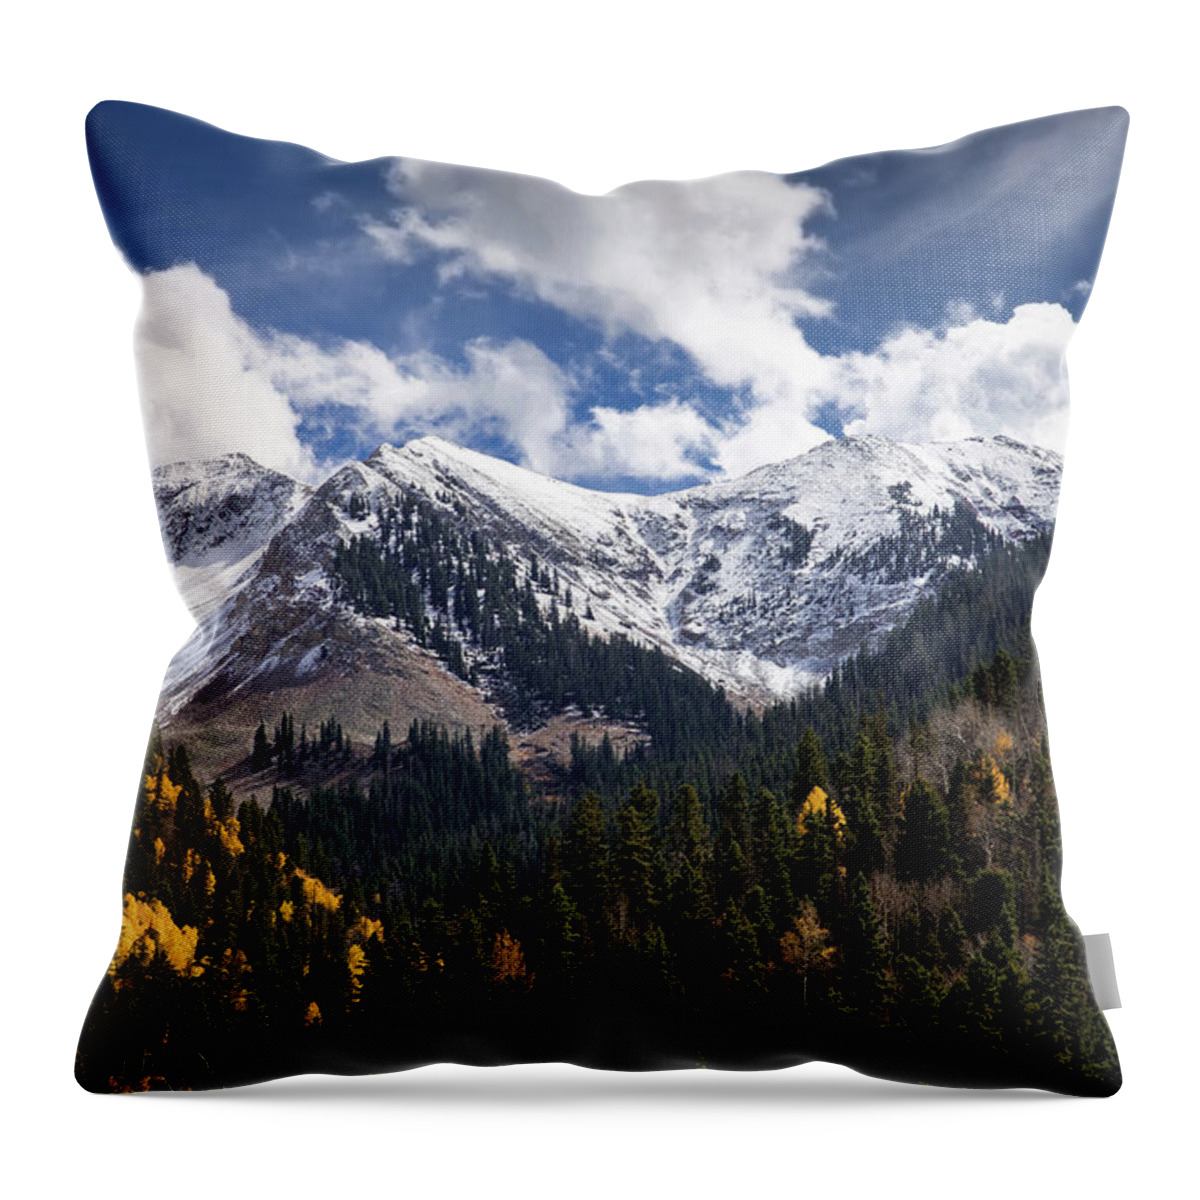 Mountains Throw Pillow featuring the photograph First Snow by Jen Manganello